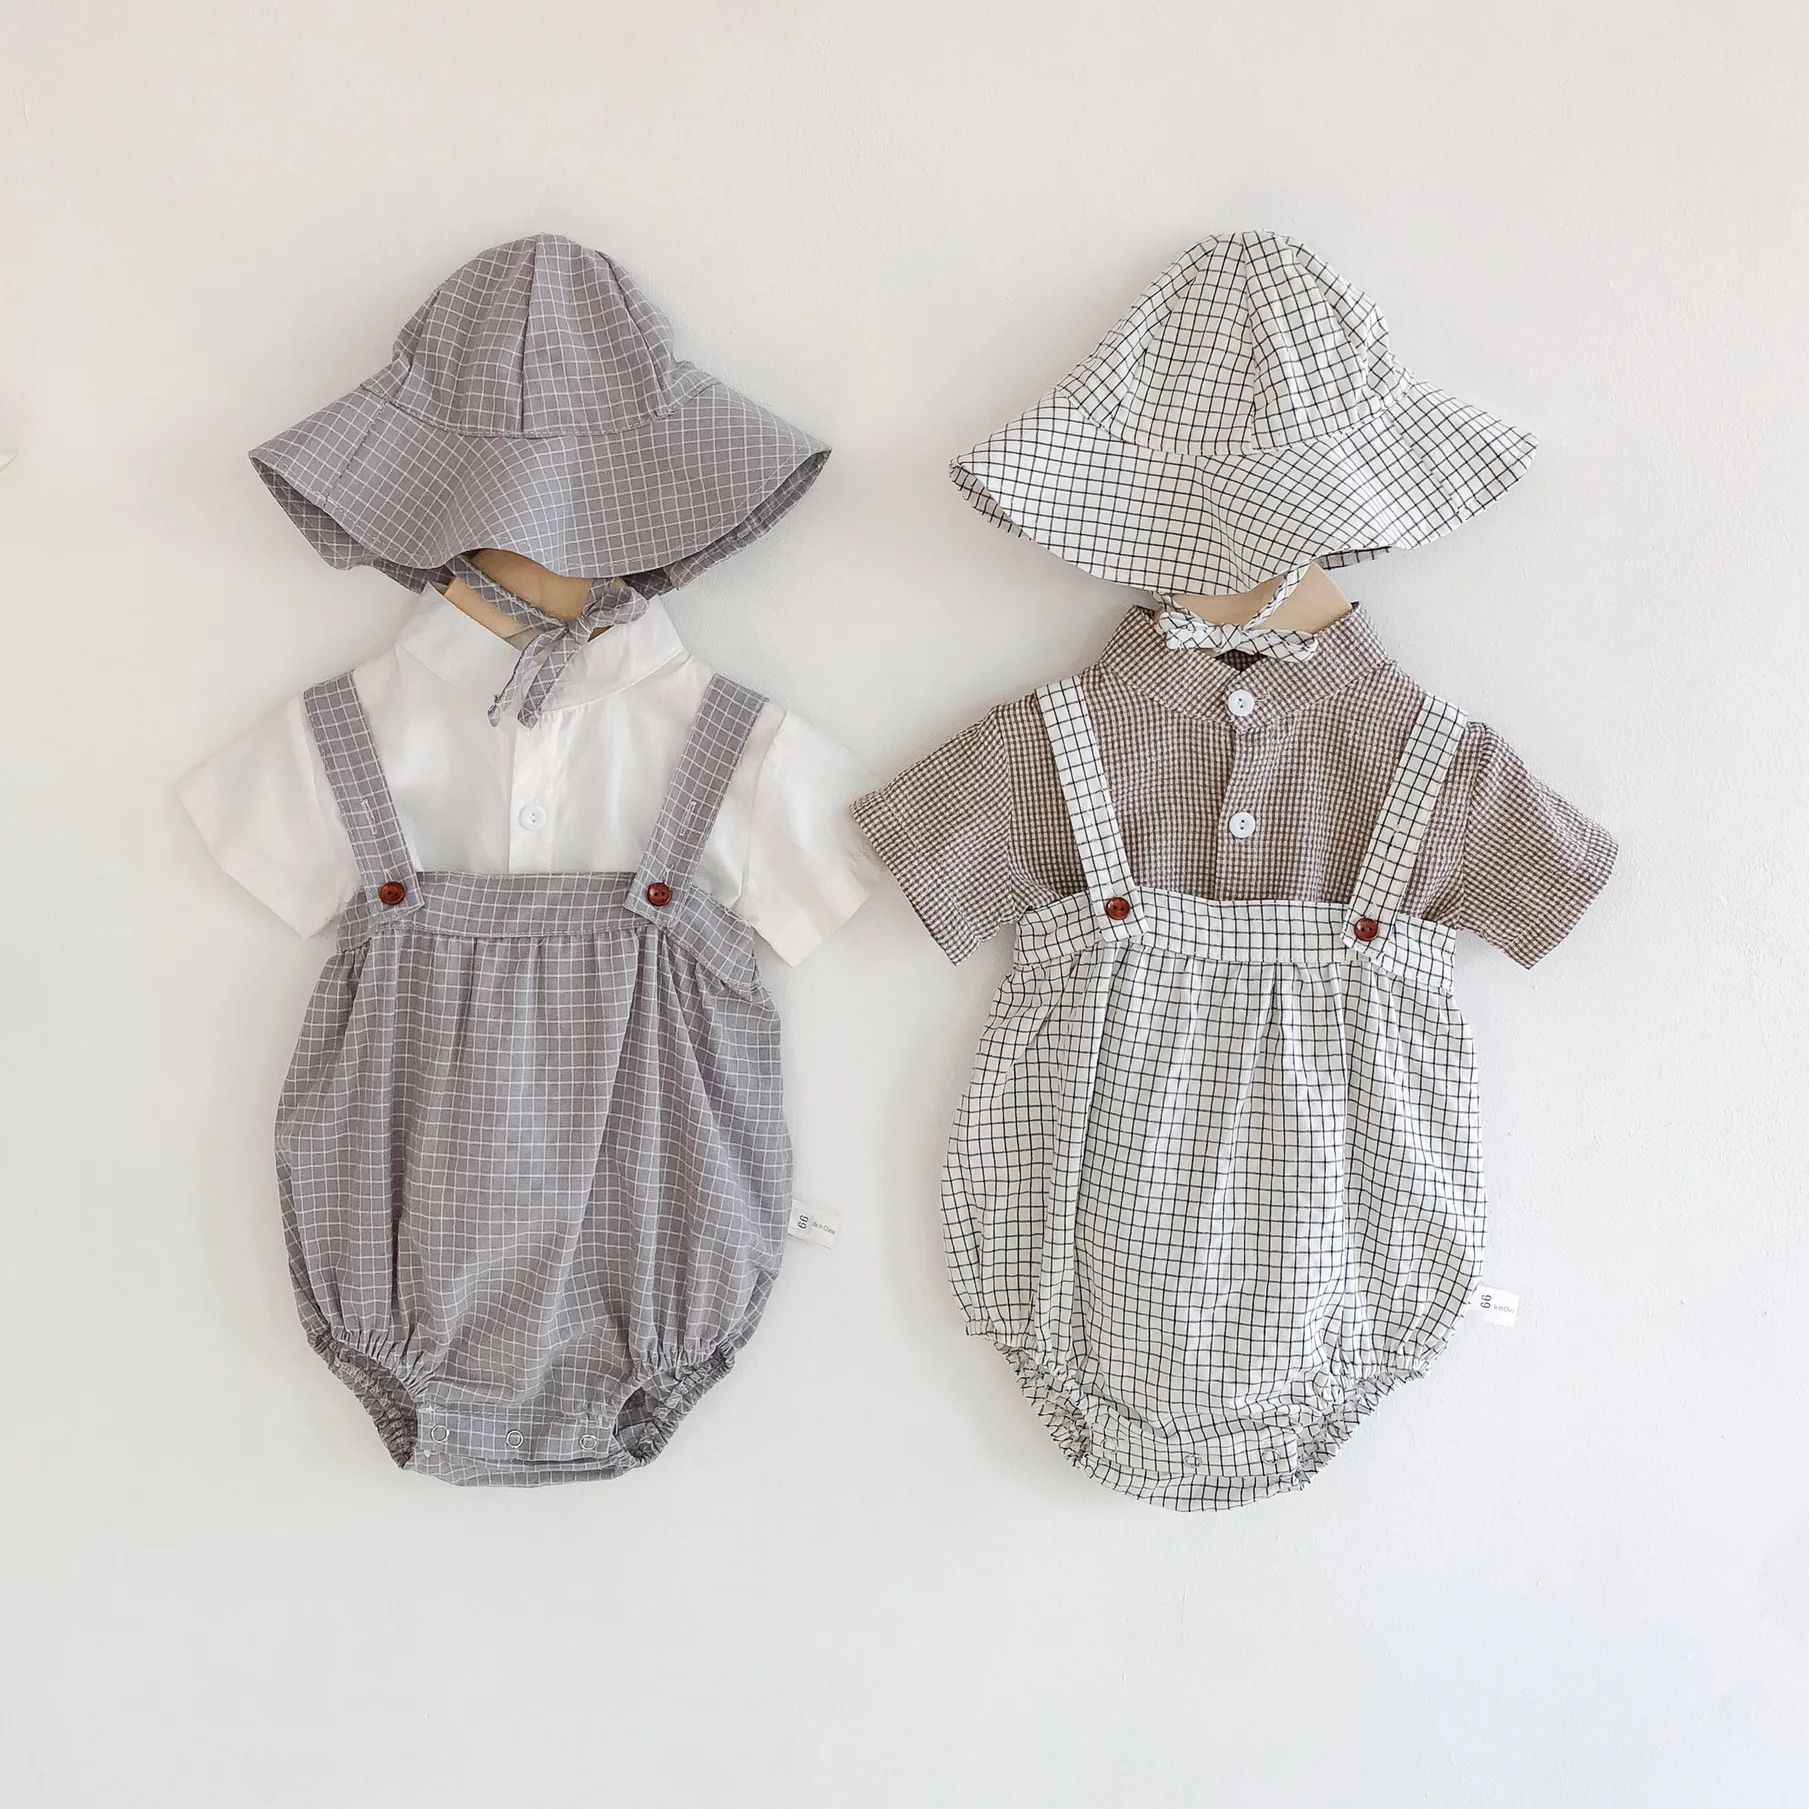 

Summer Baby Girls Boys Plaid Suspender Onesies Bodysuits+TopTees+Hat Toddler 100% Organic Cotton 3-Piece Outfit Sets 0-24 Months